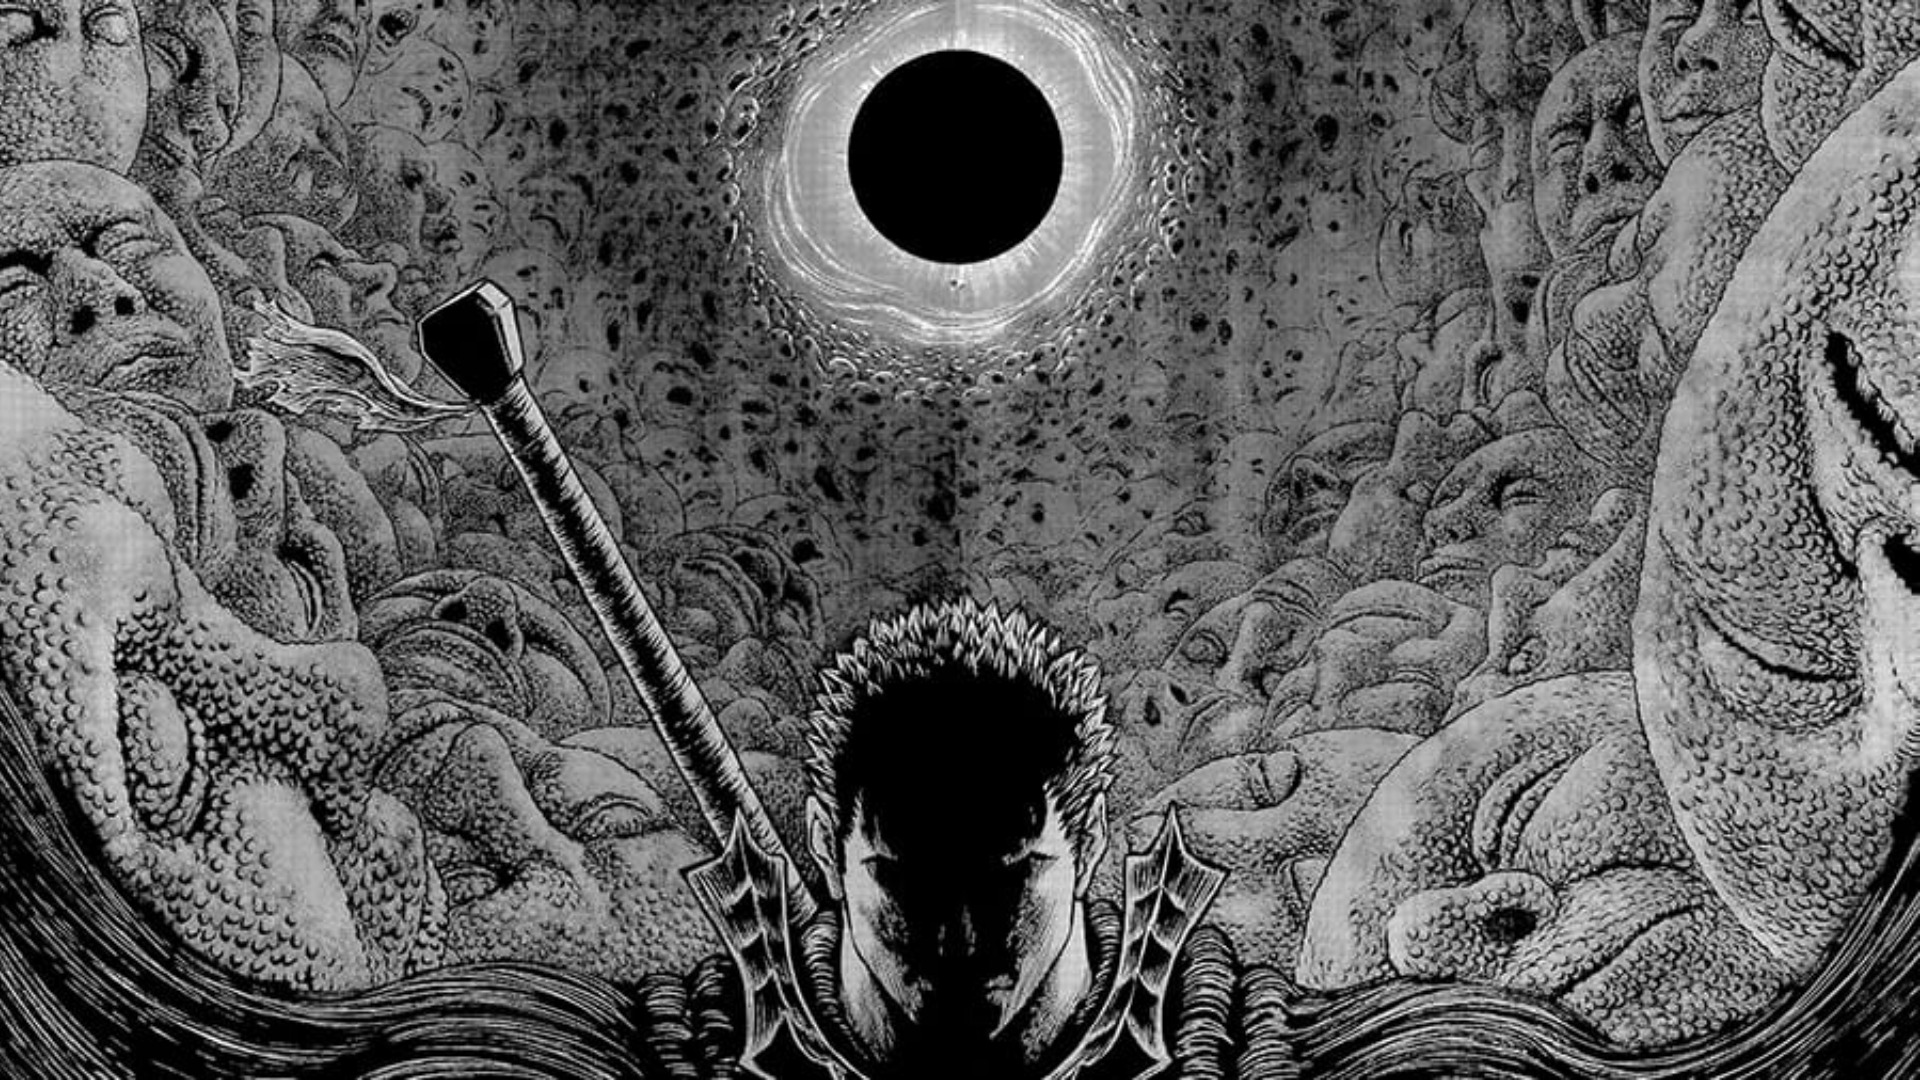 Why a Good Berserk Anime Might Be Impossible